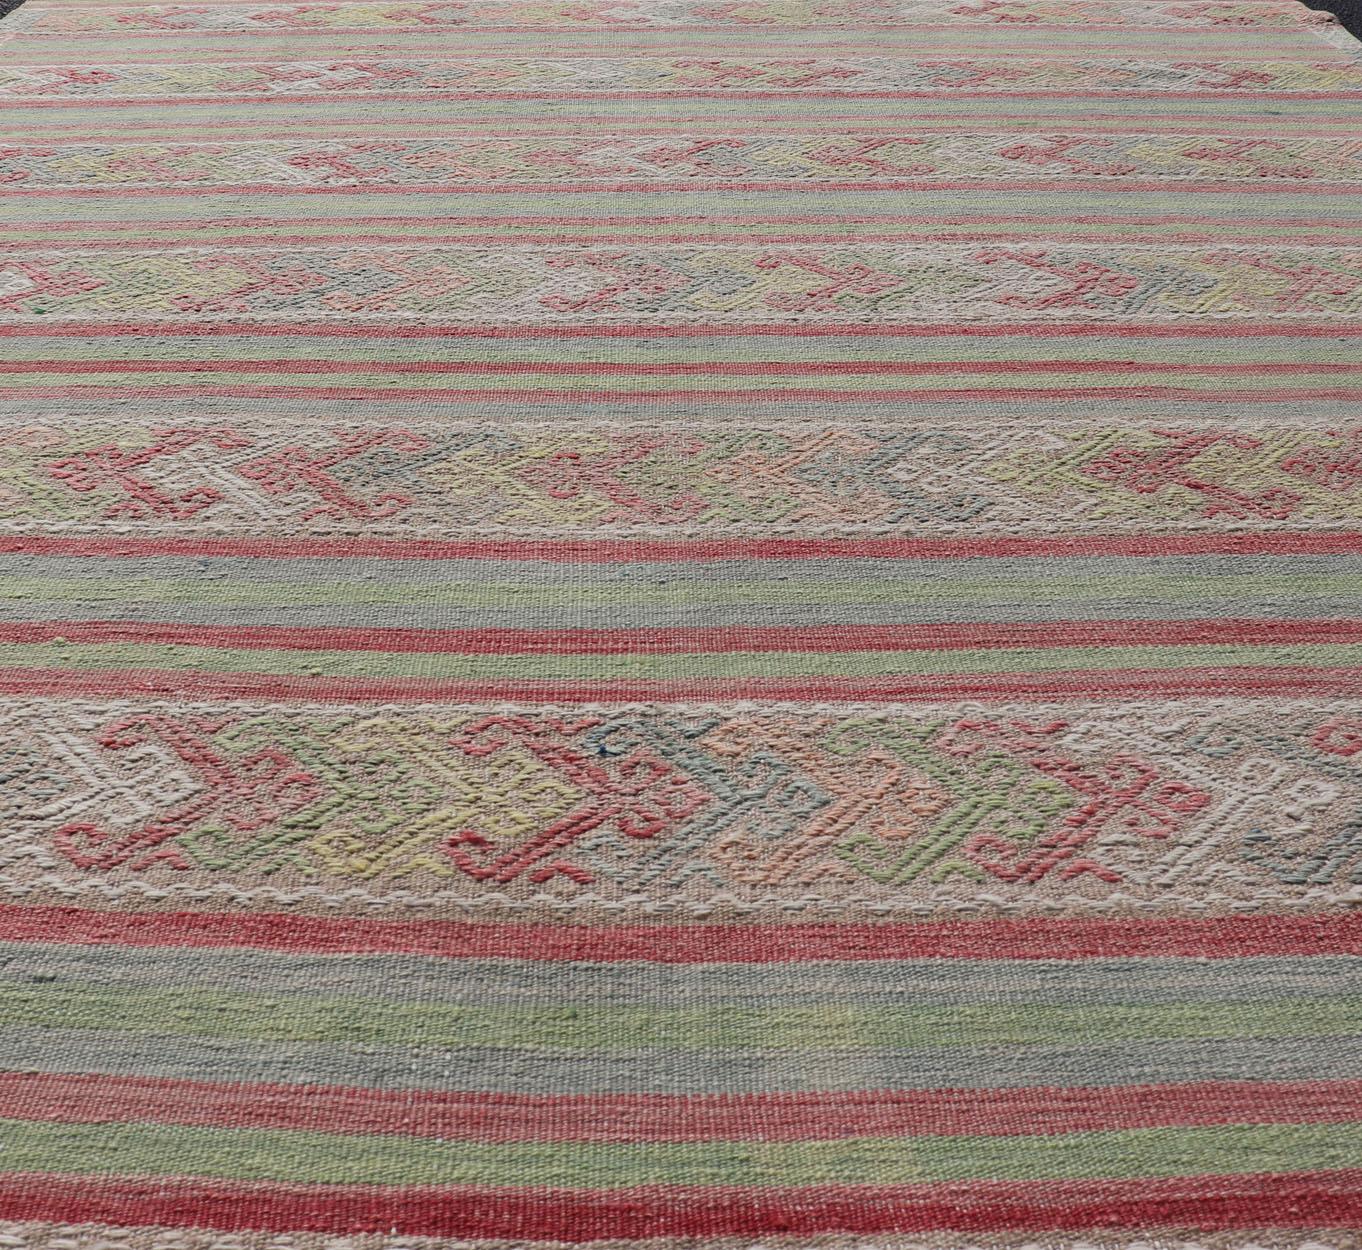 Colorful Vintage Embroidered Kilim with Stripes and Alternating Geometric Motifs For Sale 1